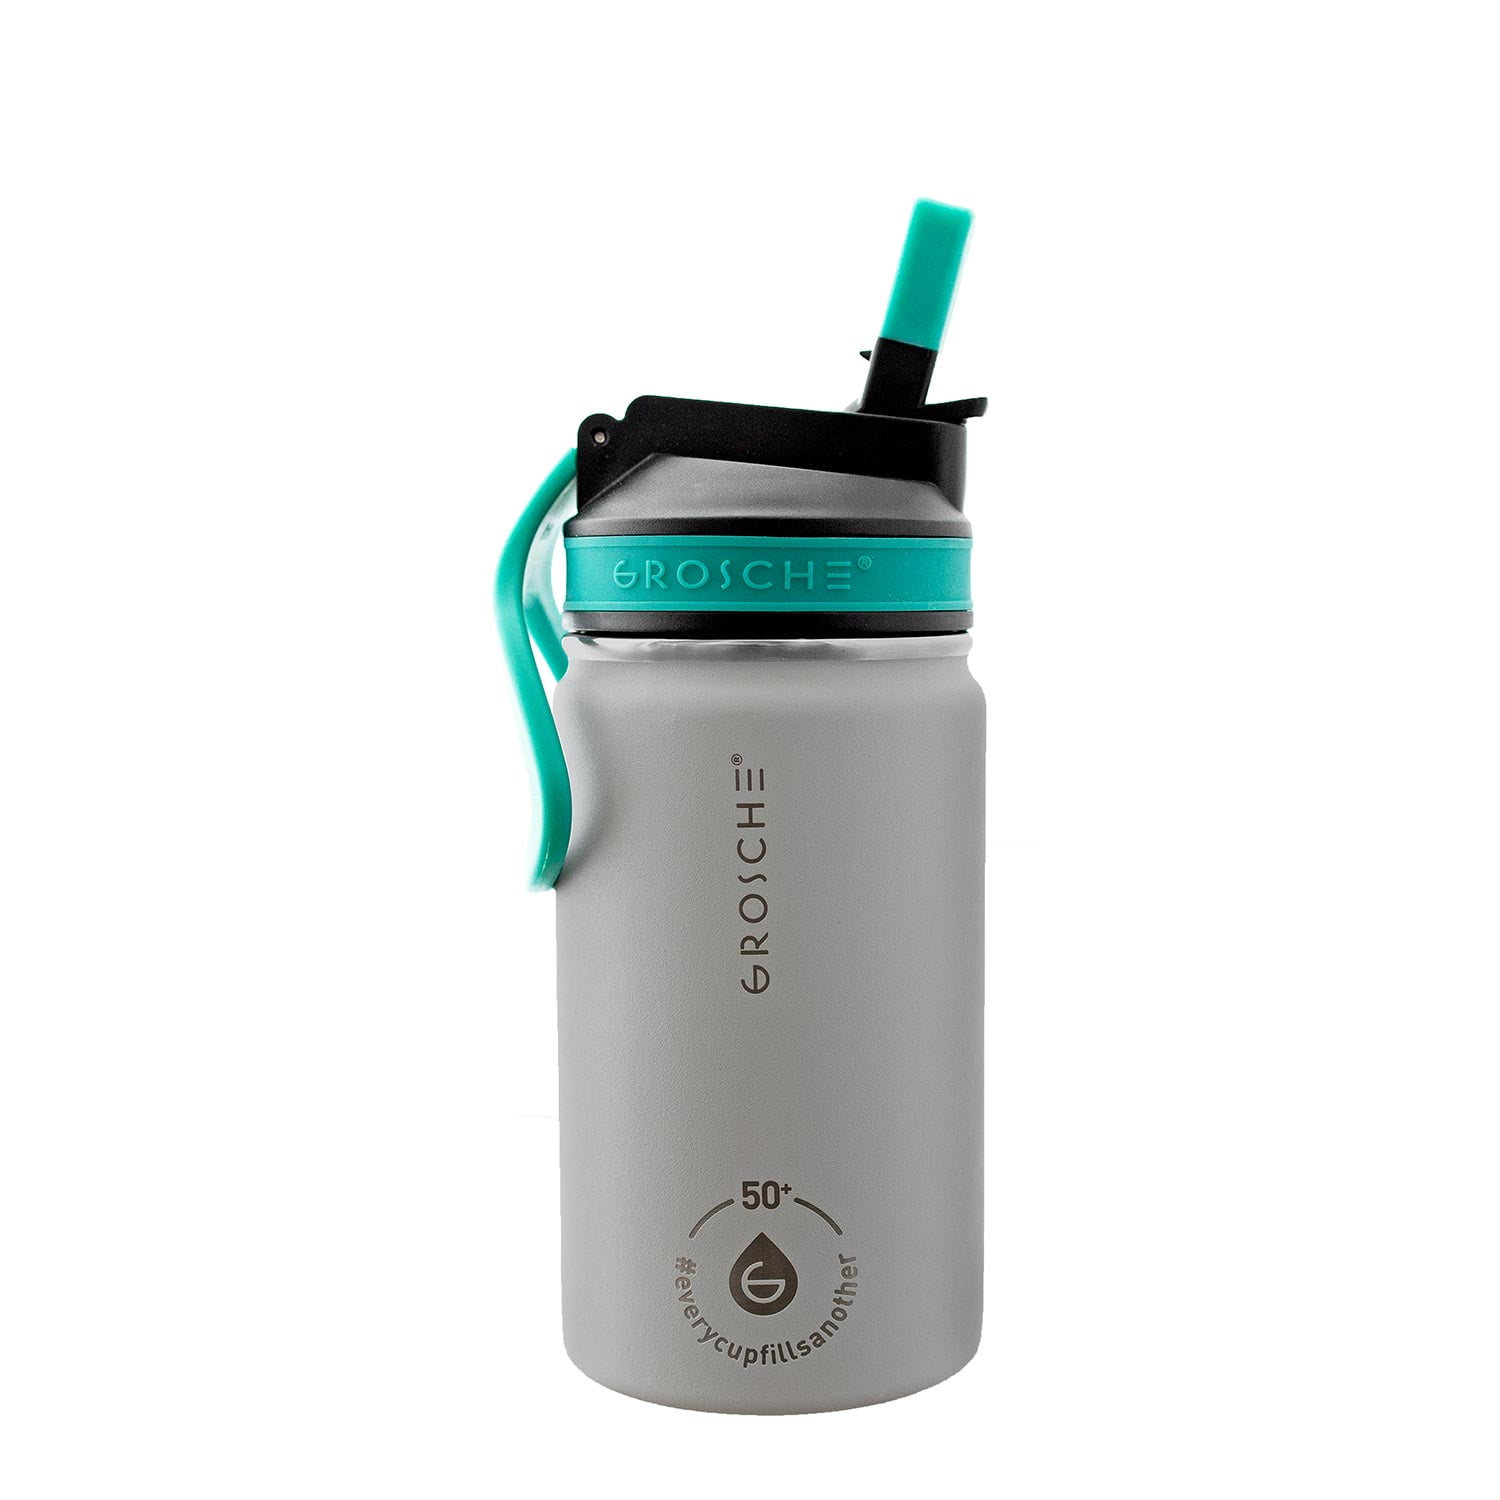 JoyJolt Triple Insulated Water Bottle with Straw Lid AND Flip Lid! 32oz  Large Water Bottle, 12 Hour Hot/Cold Vacuum Insulated Stainless Steel  Bottle.